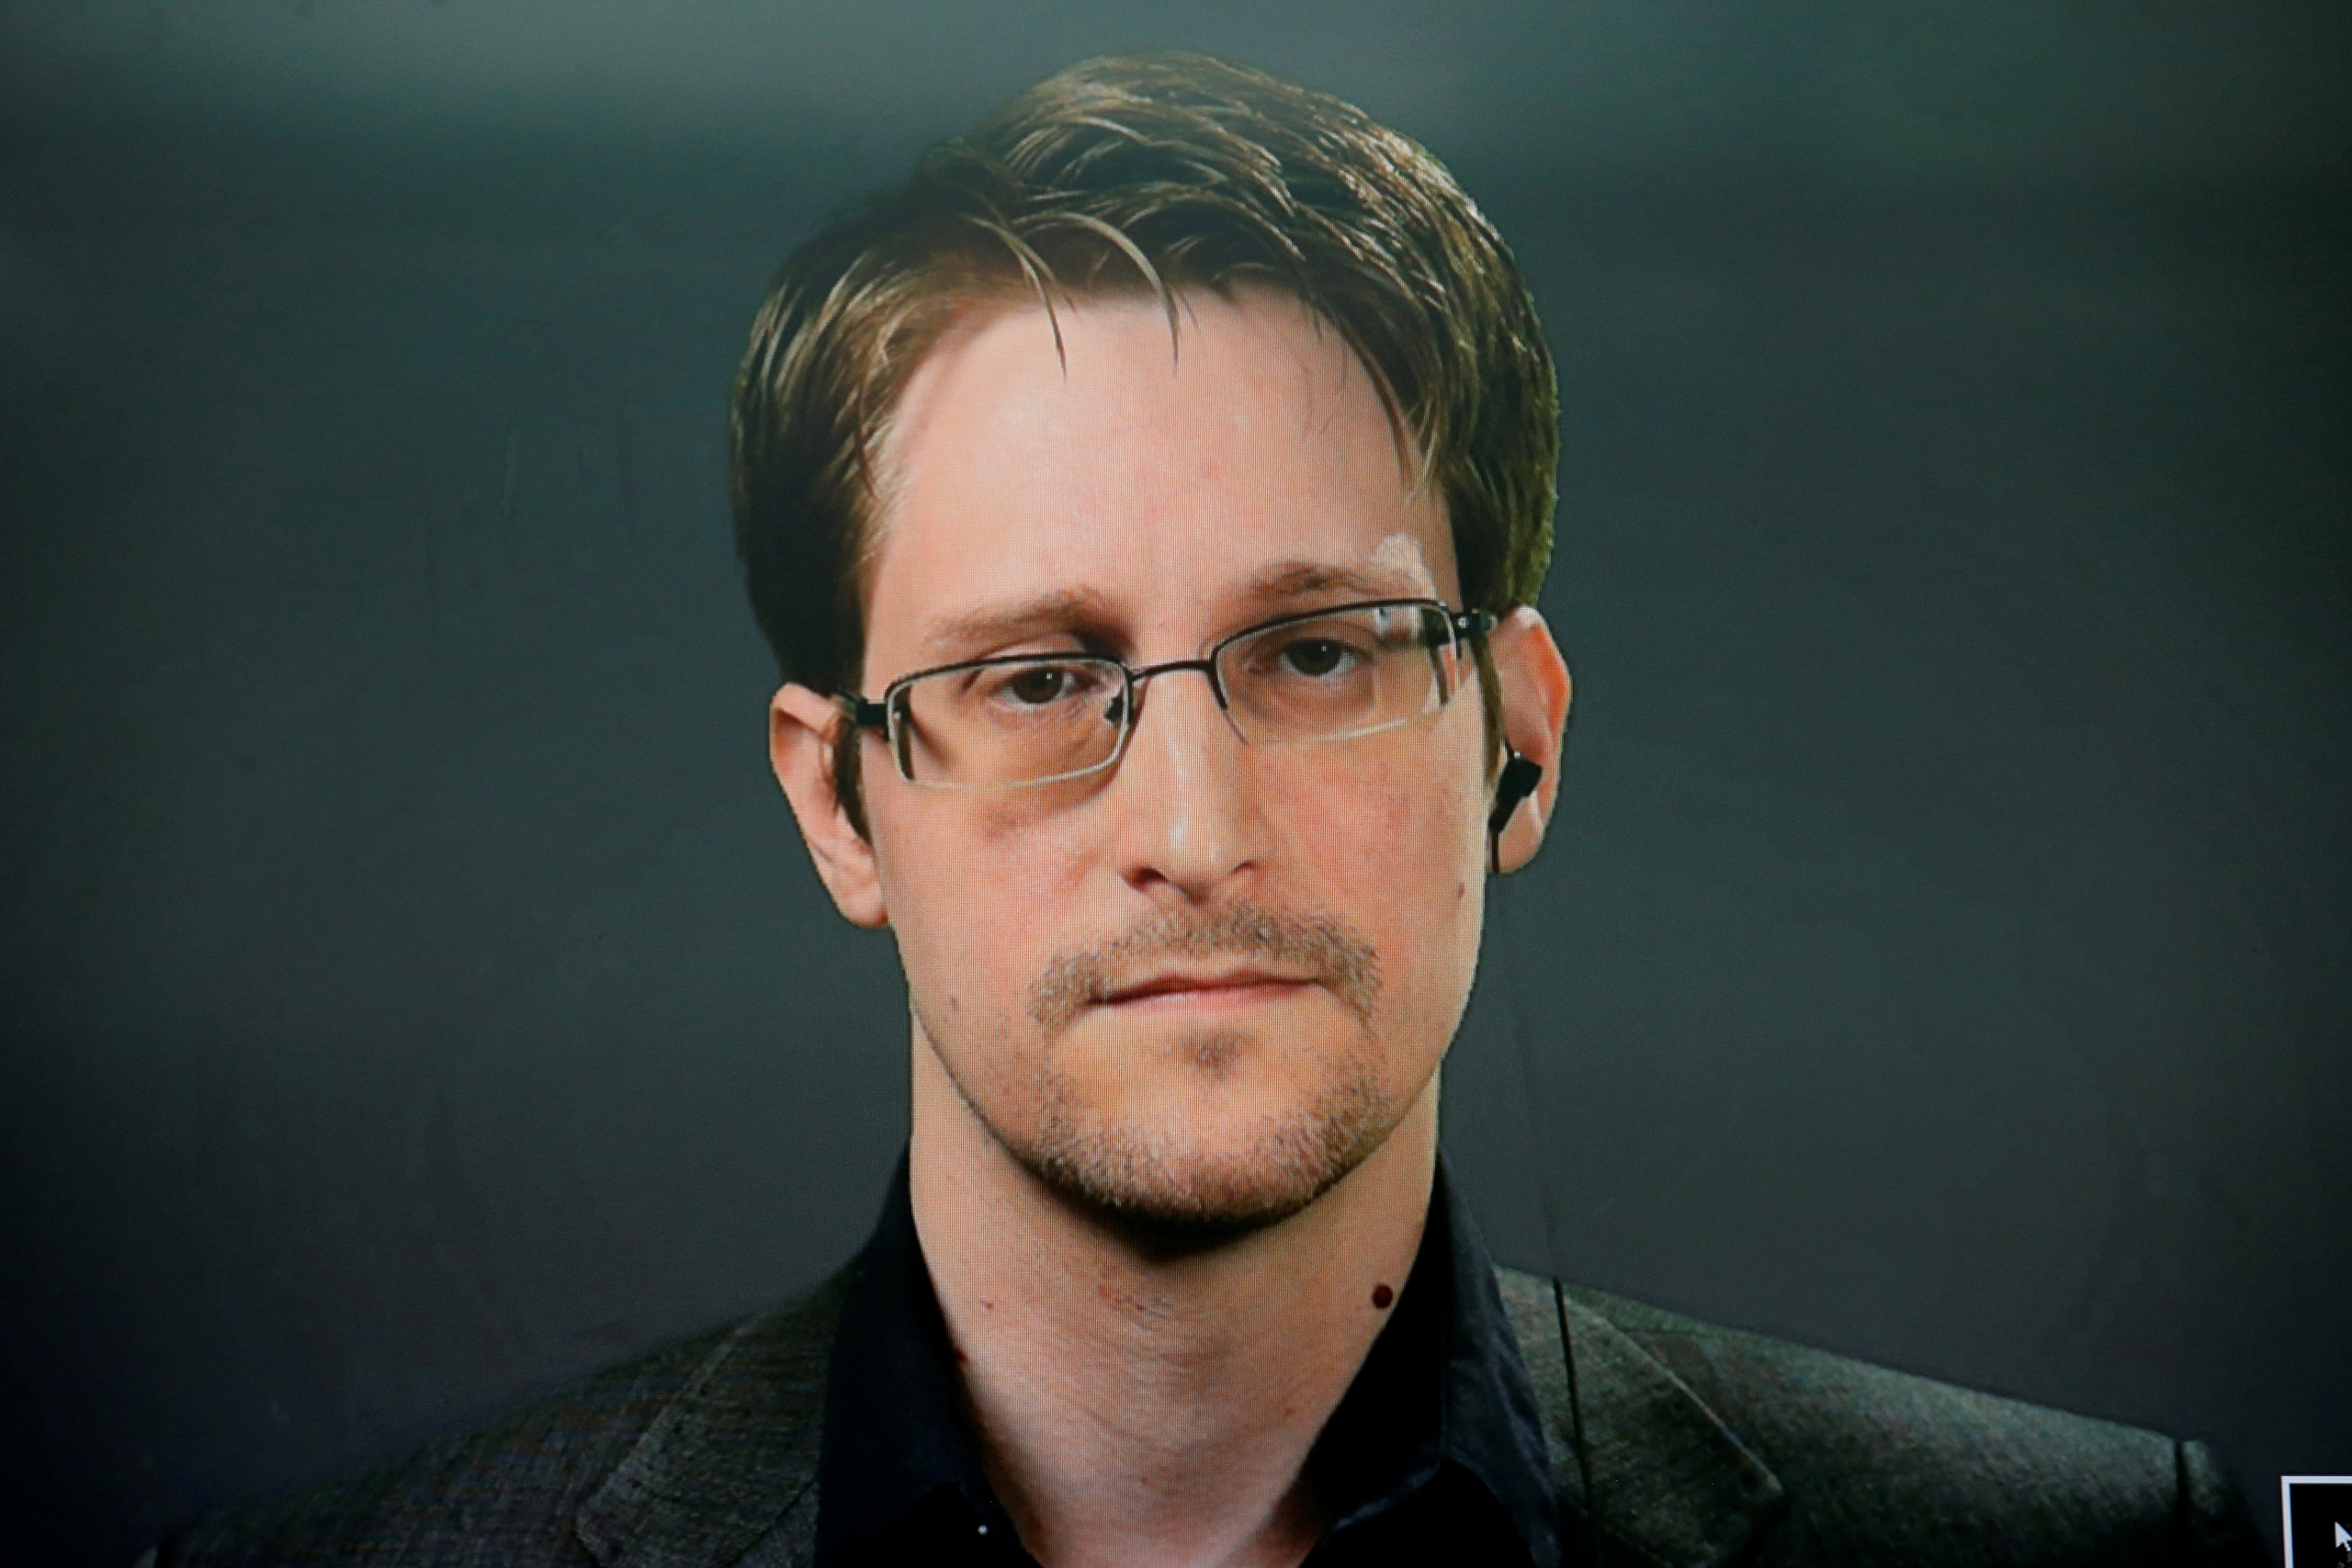 Edward Snowden speaks via video link during a news conference in New York